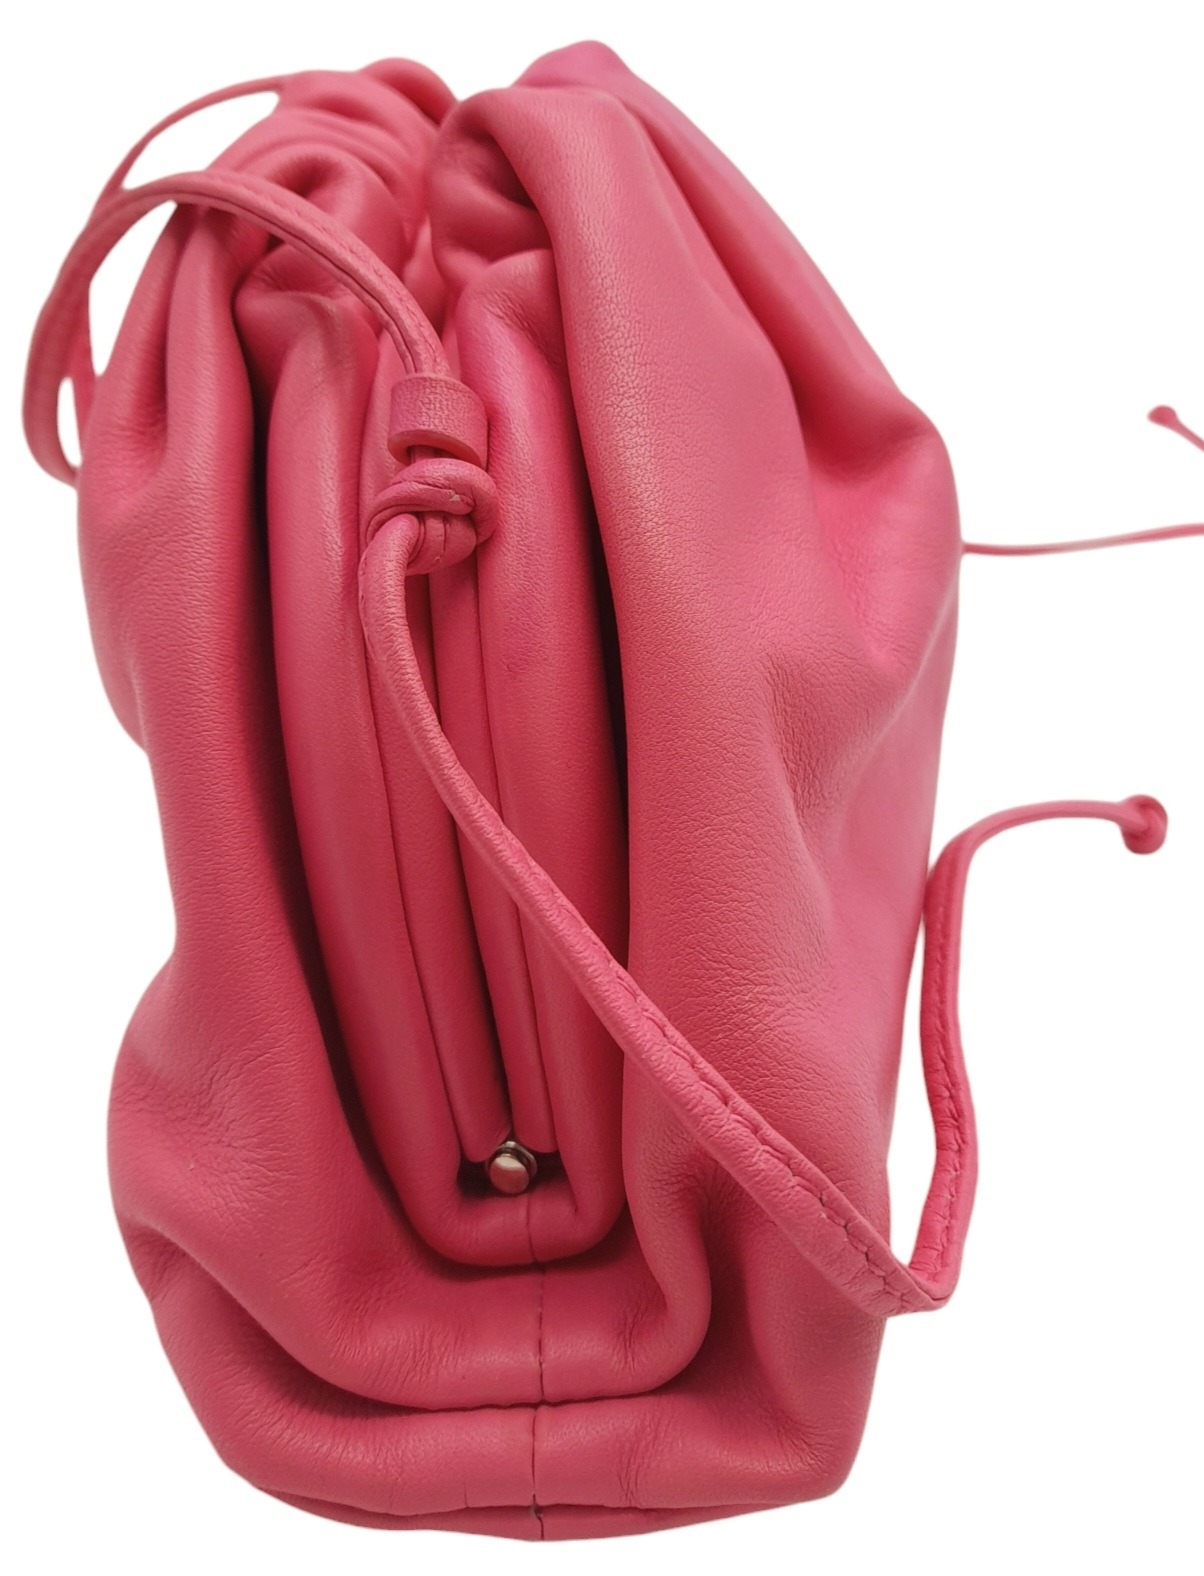 A Bottega Veneta Pink Mini Pouch Bag. Leather exterior with thin strap and magnetic closure. Pink - Image 7 of 9